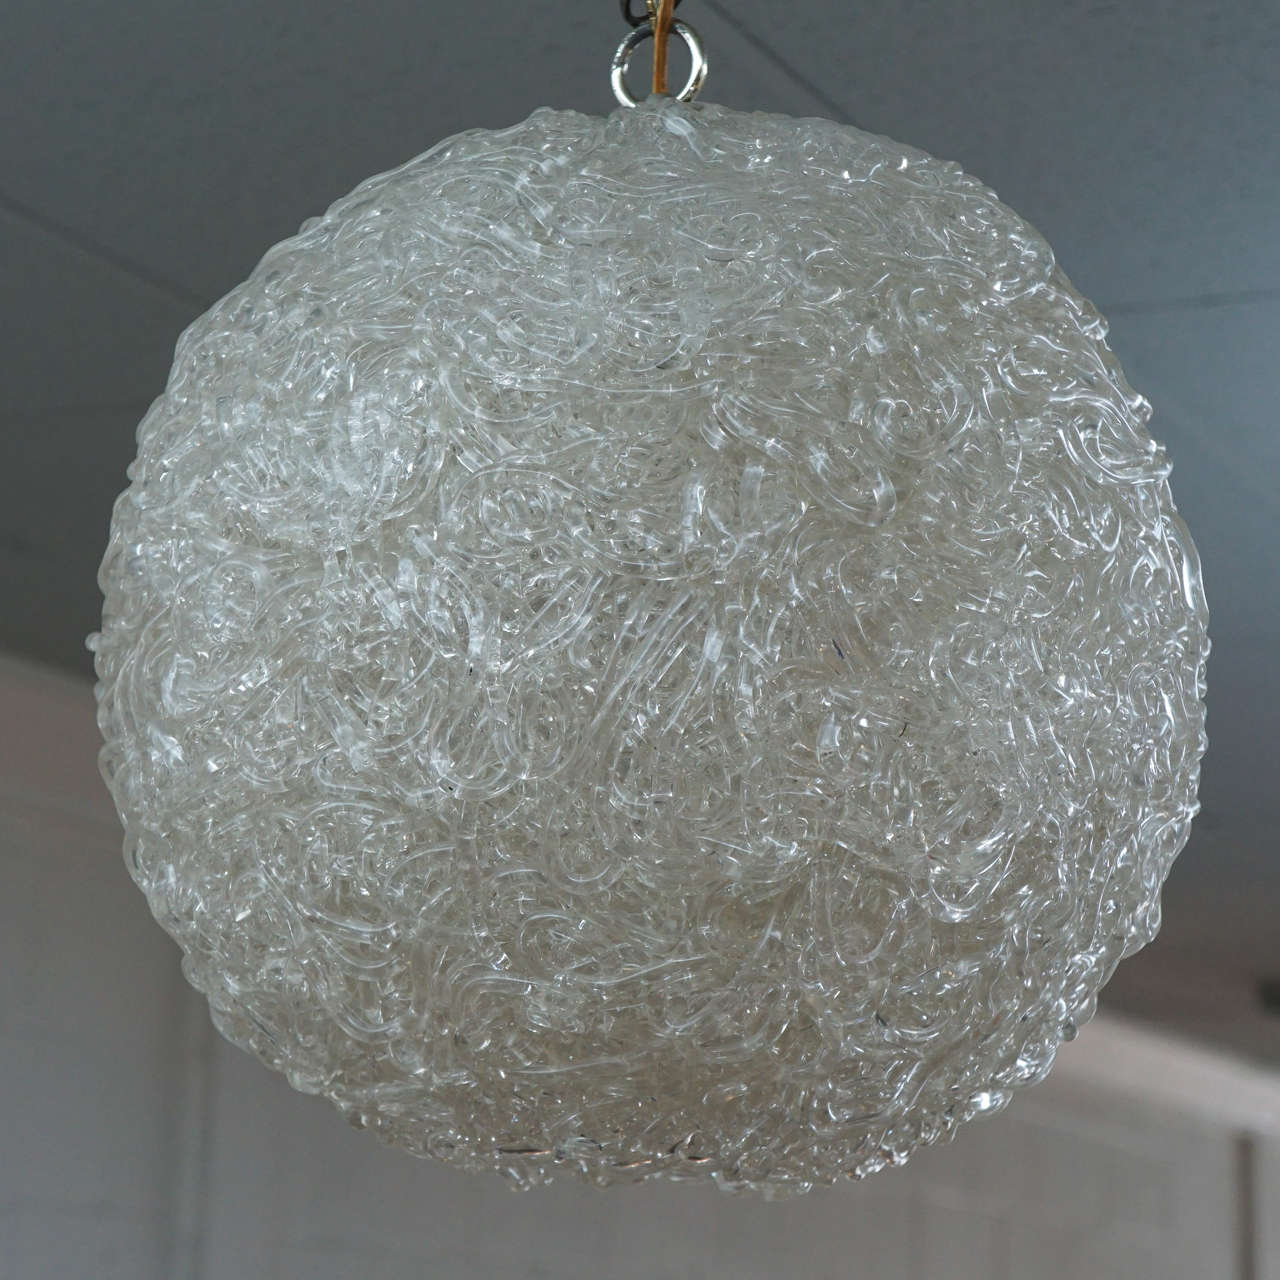 Here is a great spaghetti resin sphere light fixture from the 1960's.
The globe has an opening underneath and is wired with a plug in.